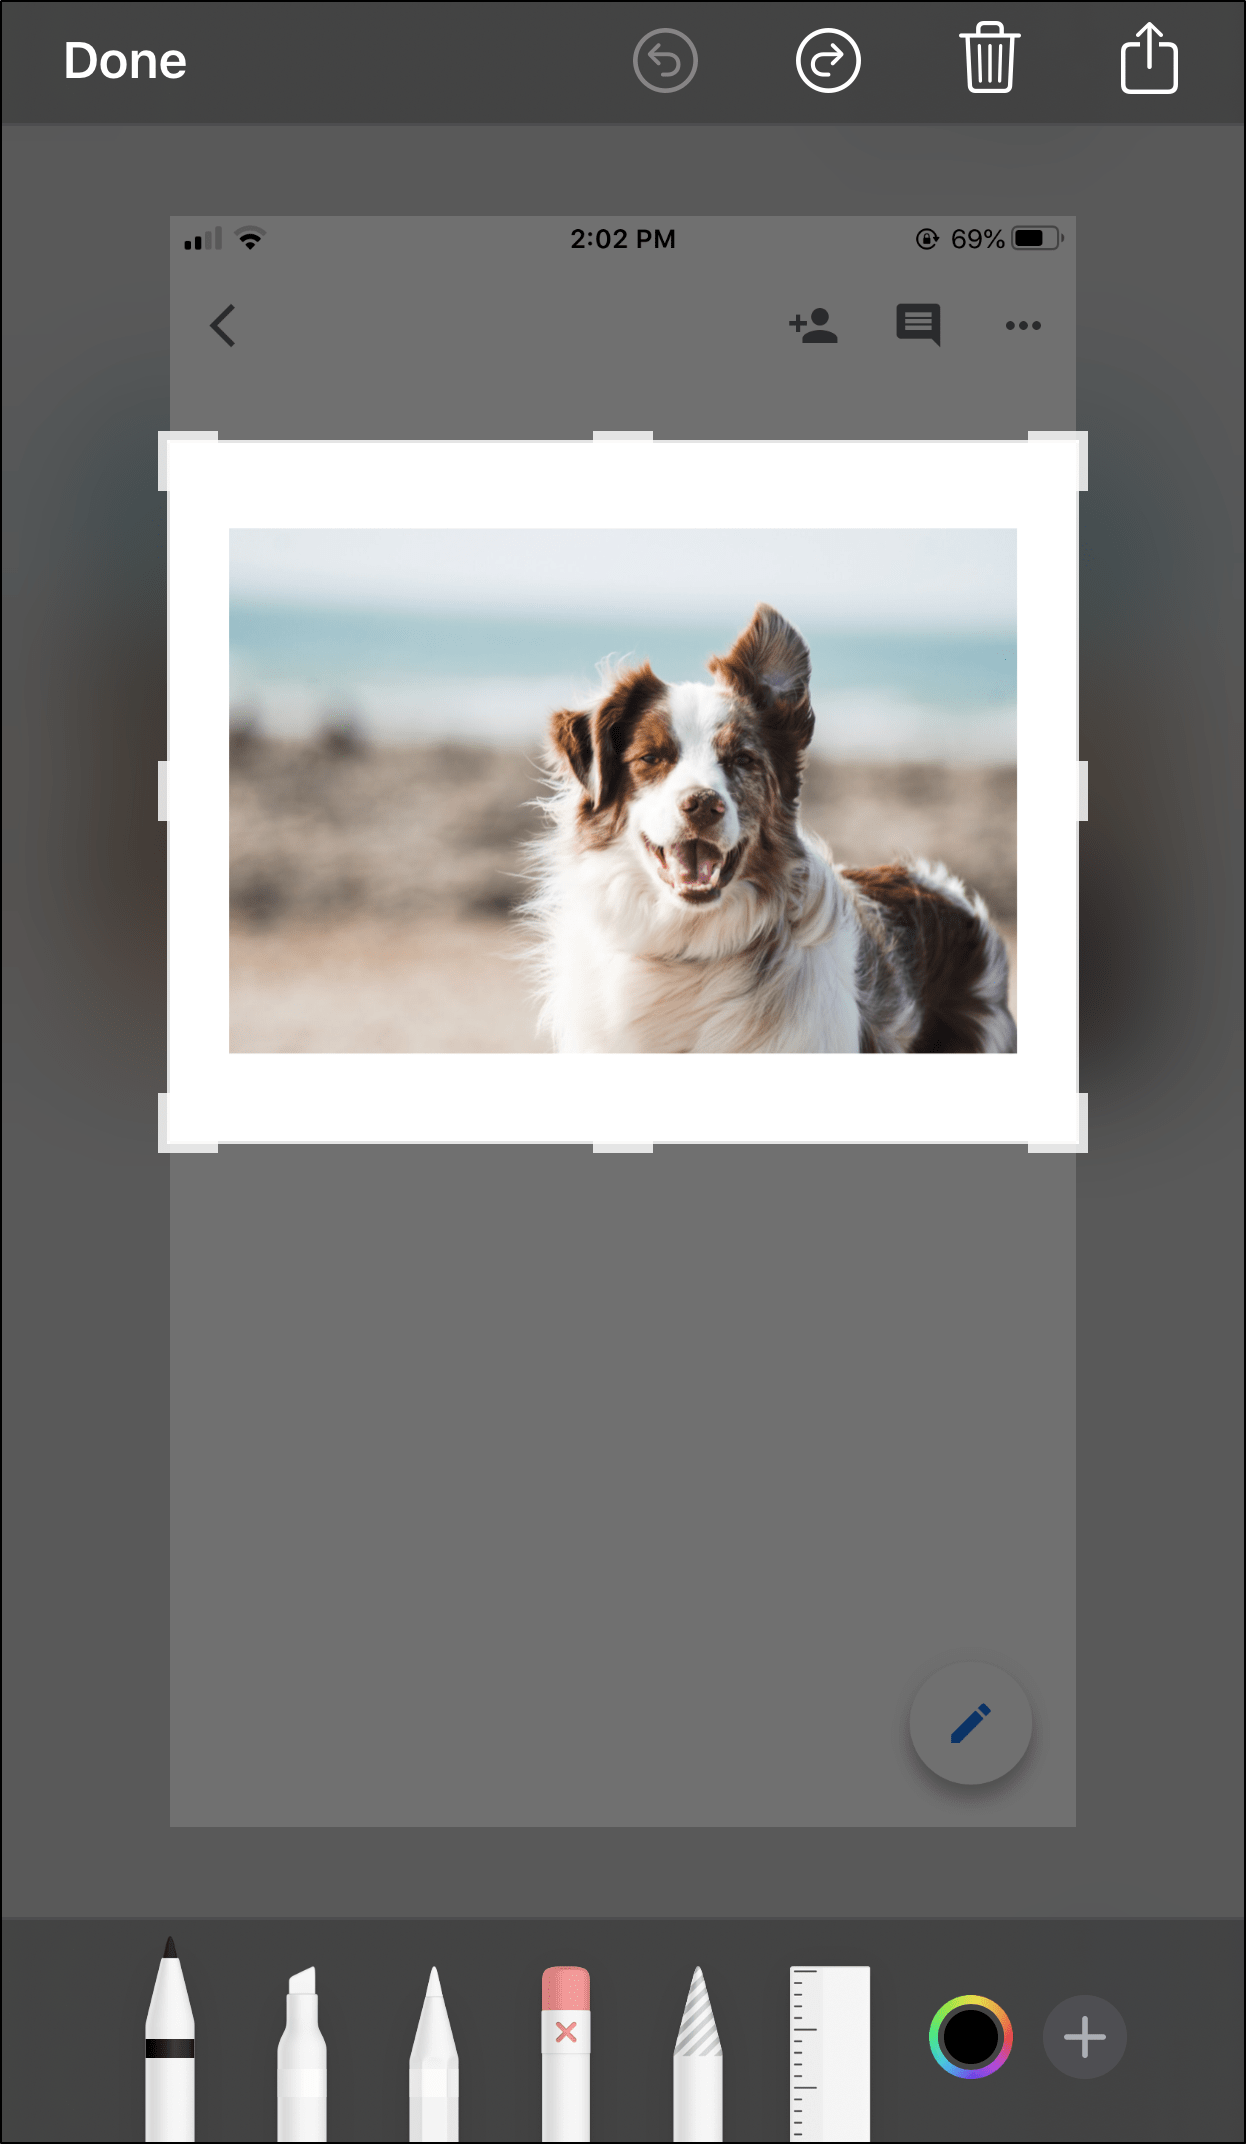 Screenshot and crop the image to save pictures from Google Docs on iPhone and Android